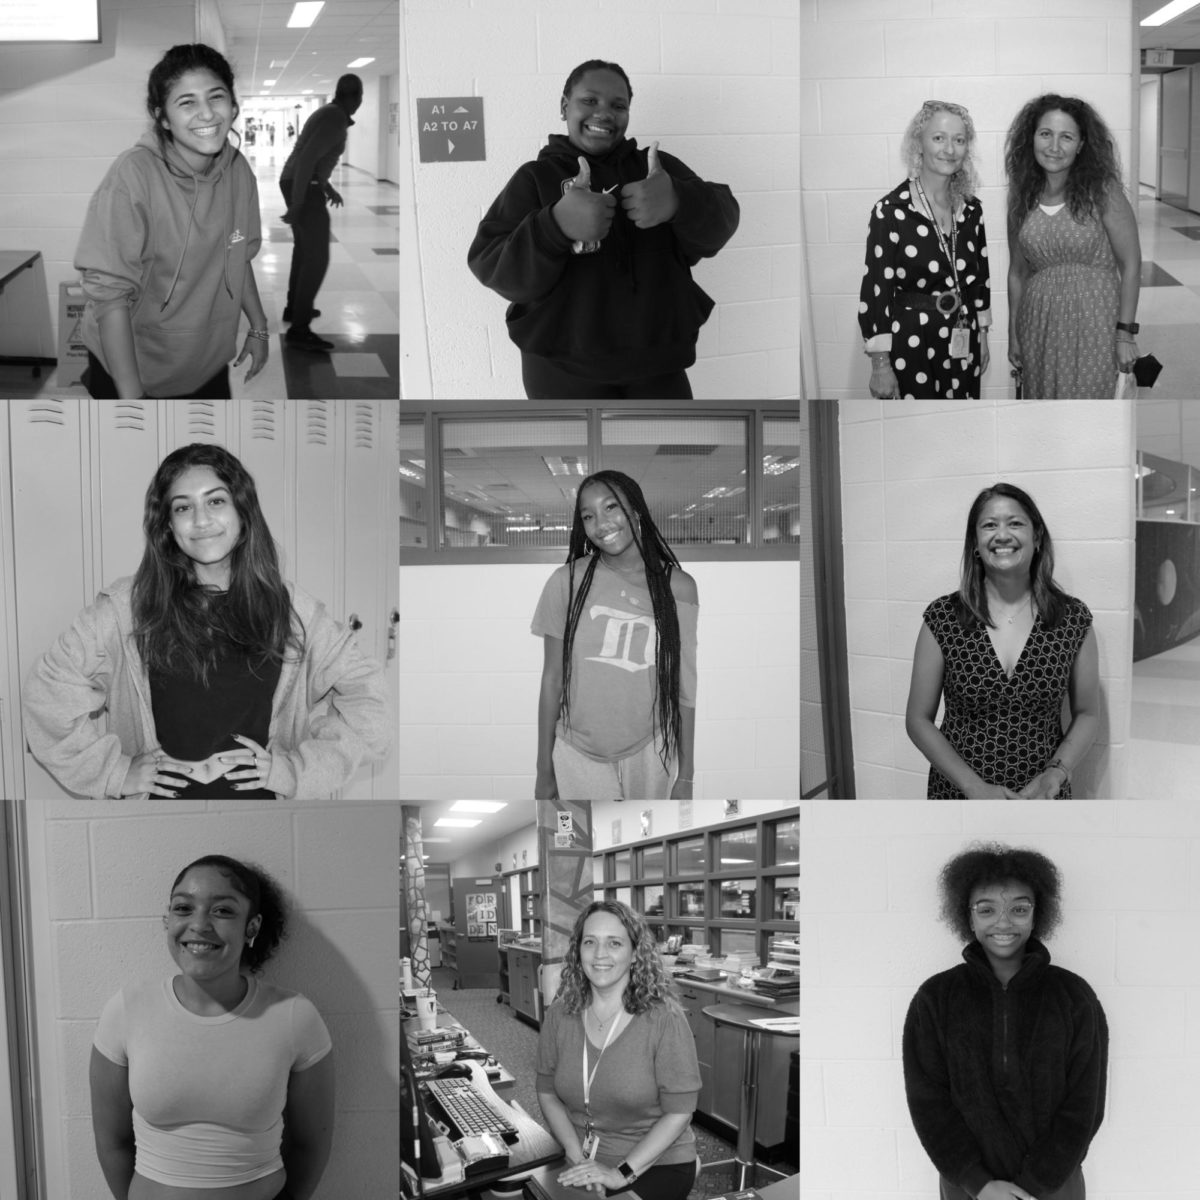 Sylvie Ball photographed a wide range of Groves attendants including staff, students and teachers around the school. The collage of photos is intended to highlight the diversity of the movie, and the Barbie tagline “You Can Be Anything.